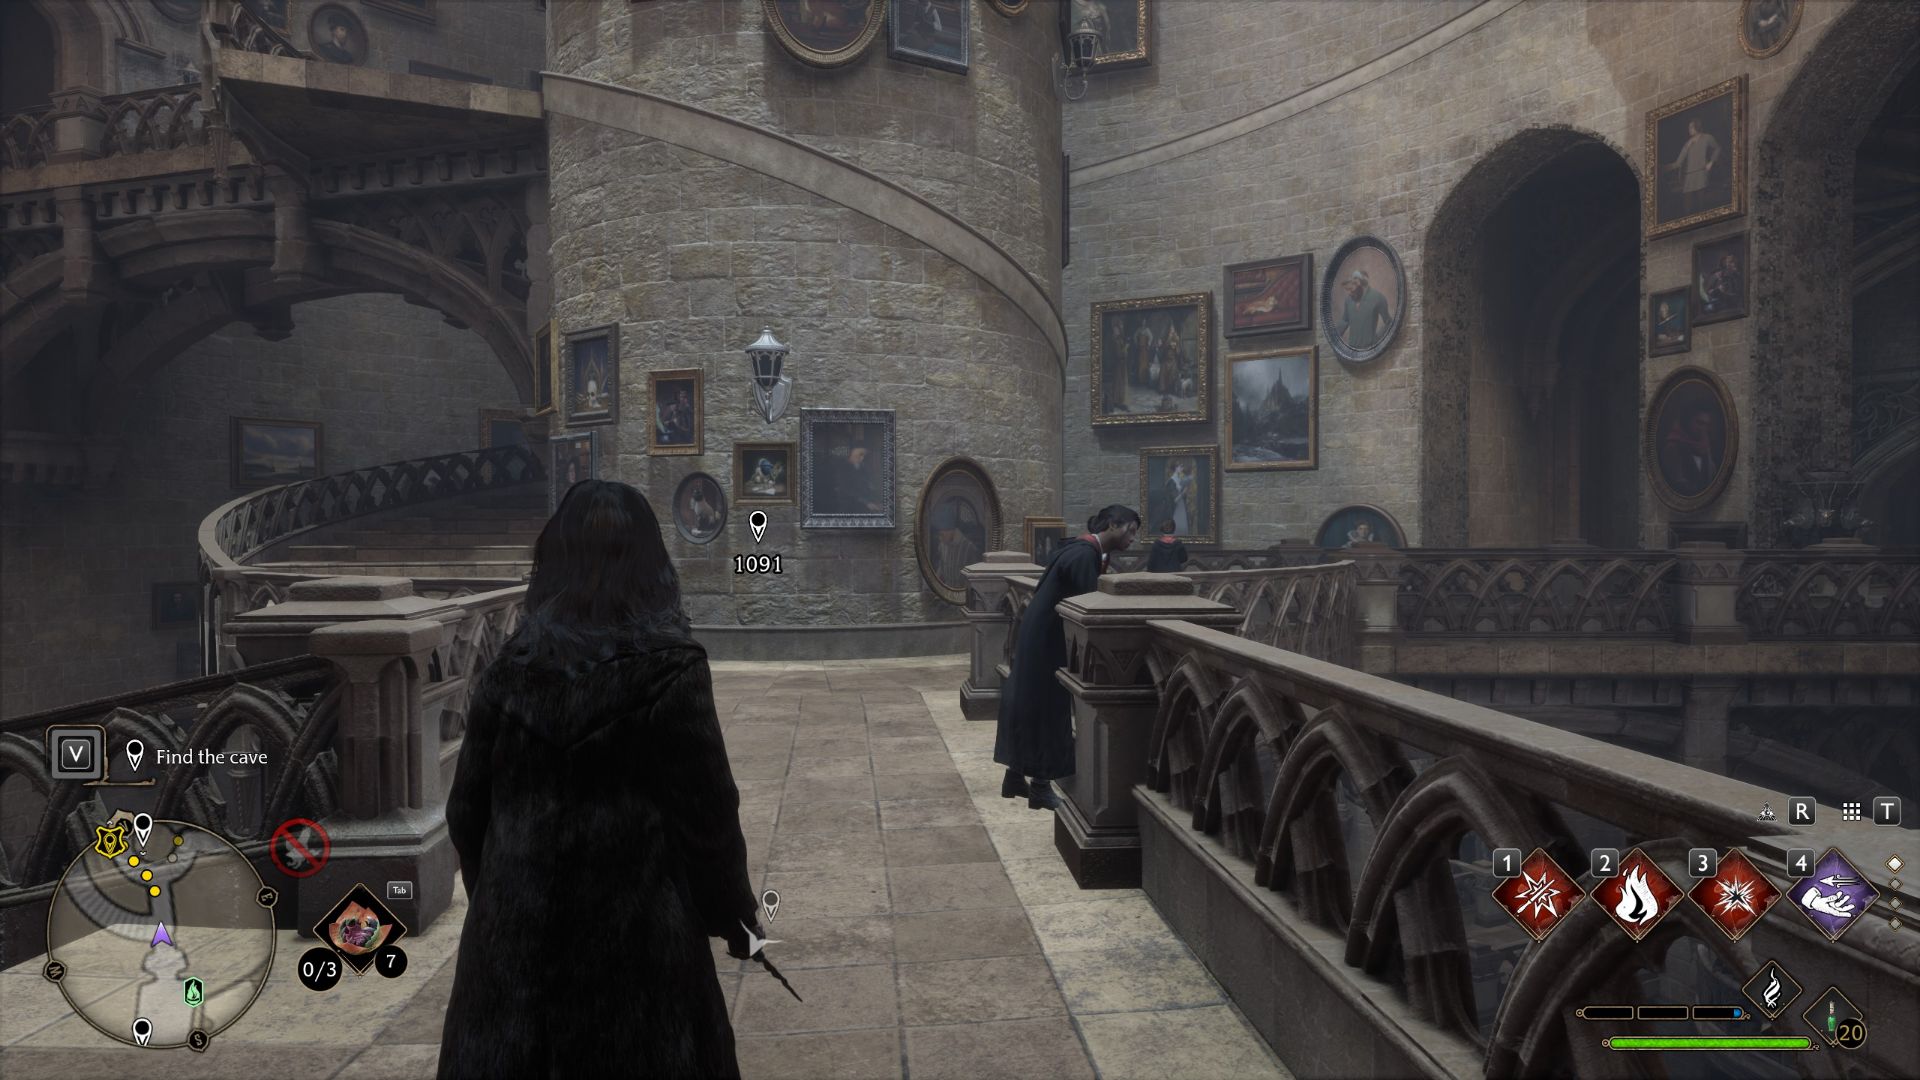 Hogwarts Legacy is an authentically magical Harry Potter game